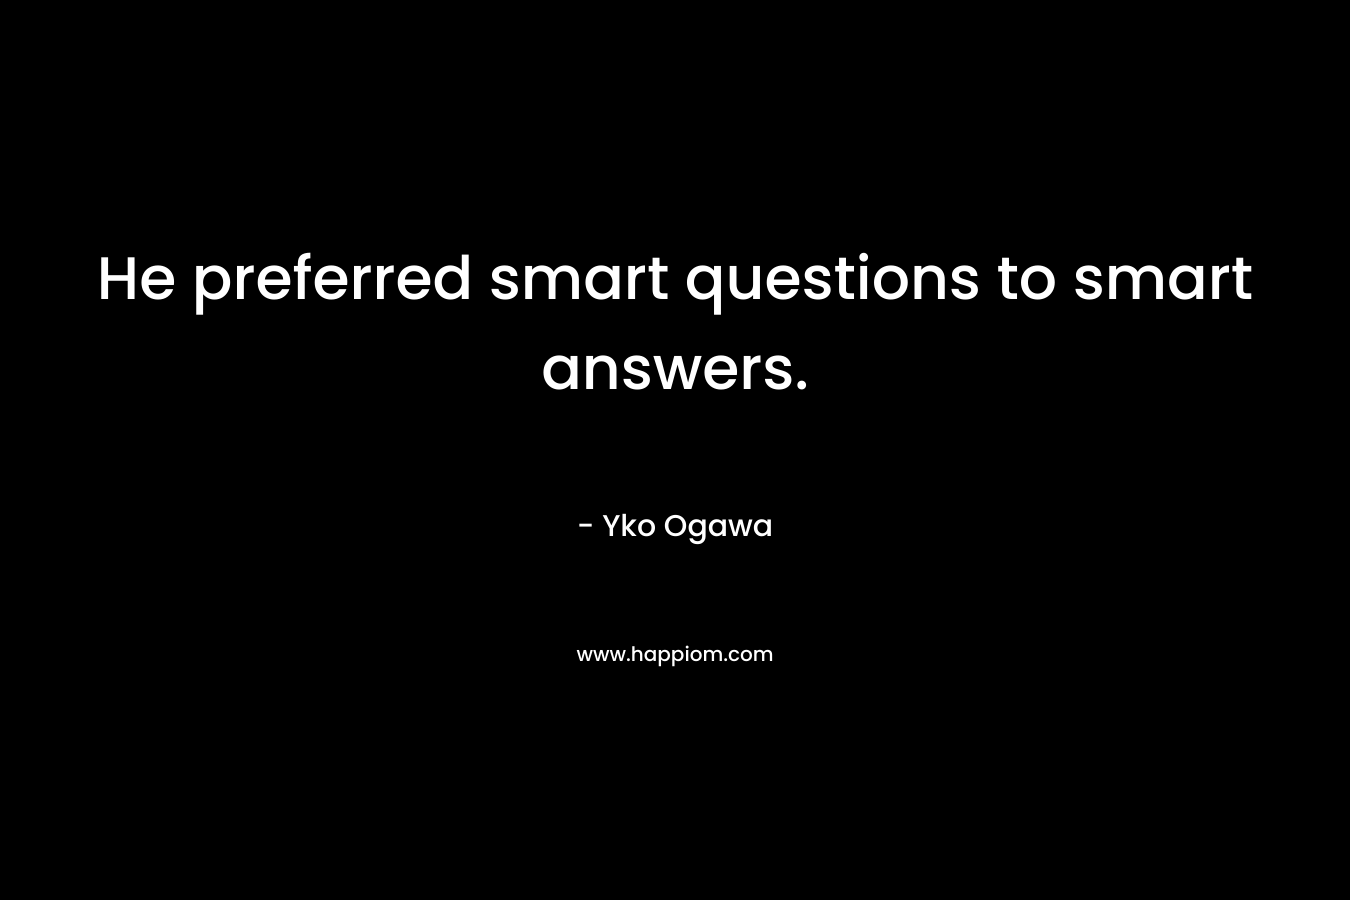 He preferred smart questions to smart answers.